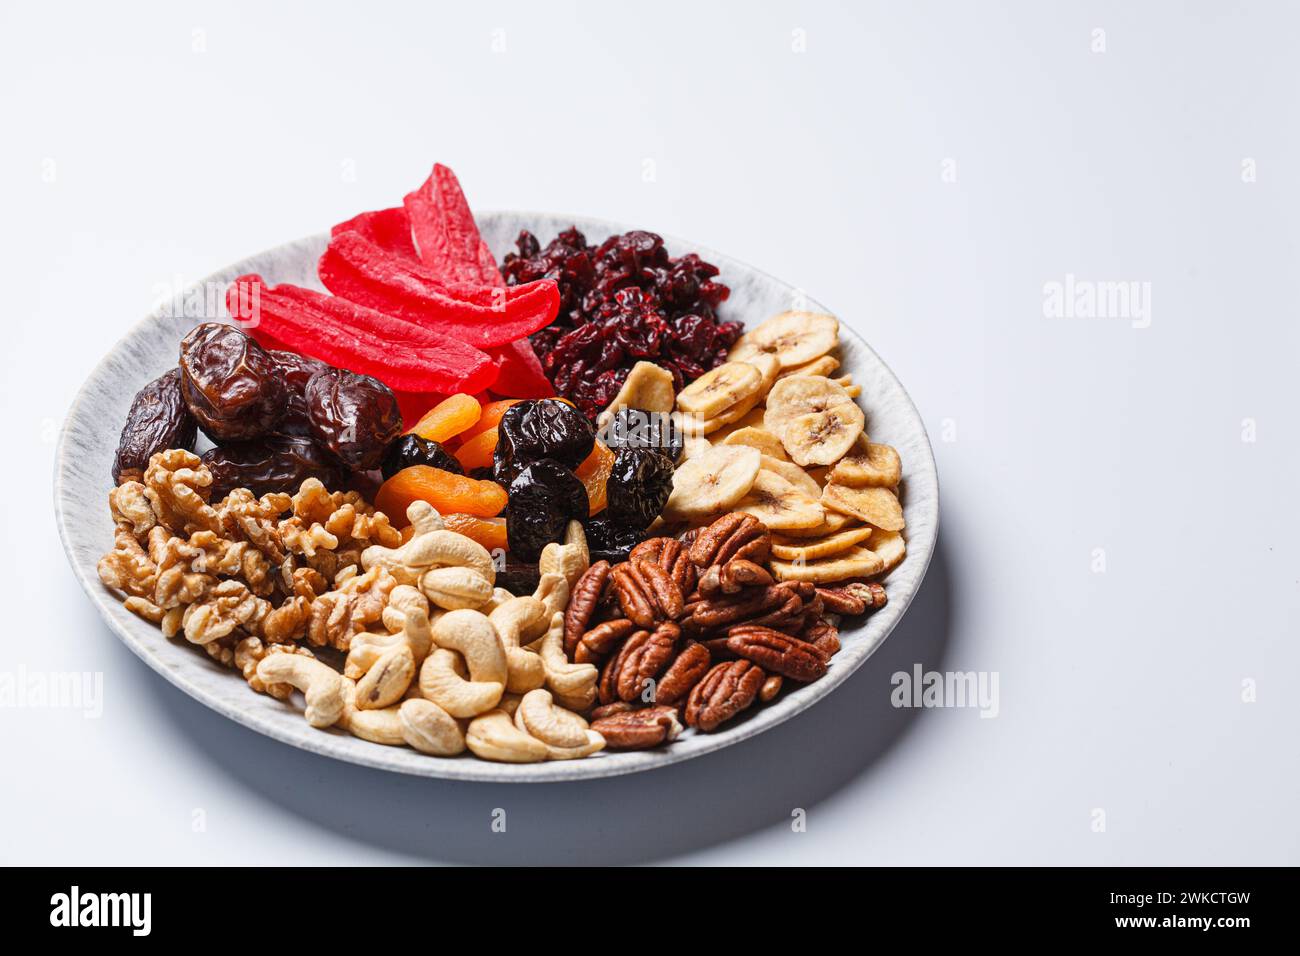 Dried fruits and nuts on a plate to celebrate the Jewish holiday Tu Bi Shevat. Stock Photo